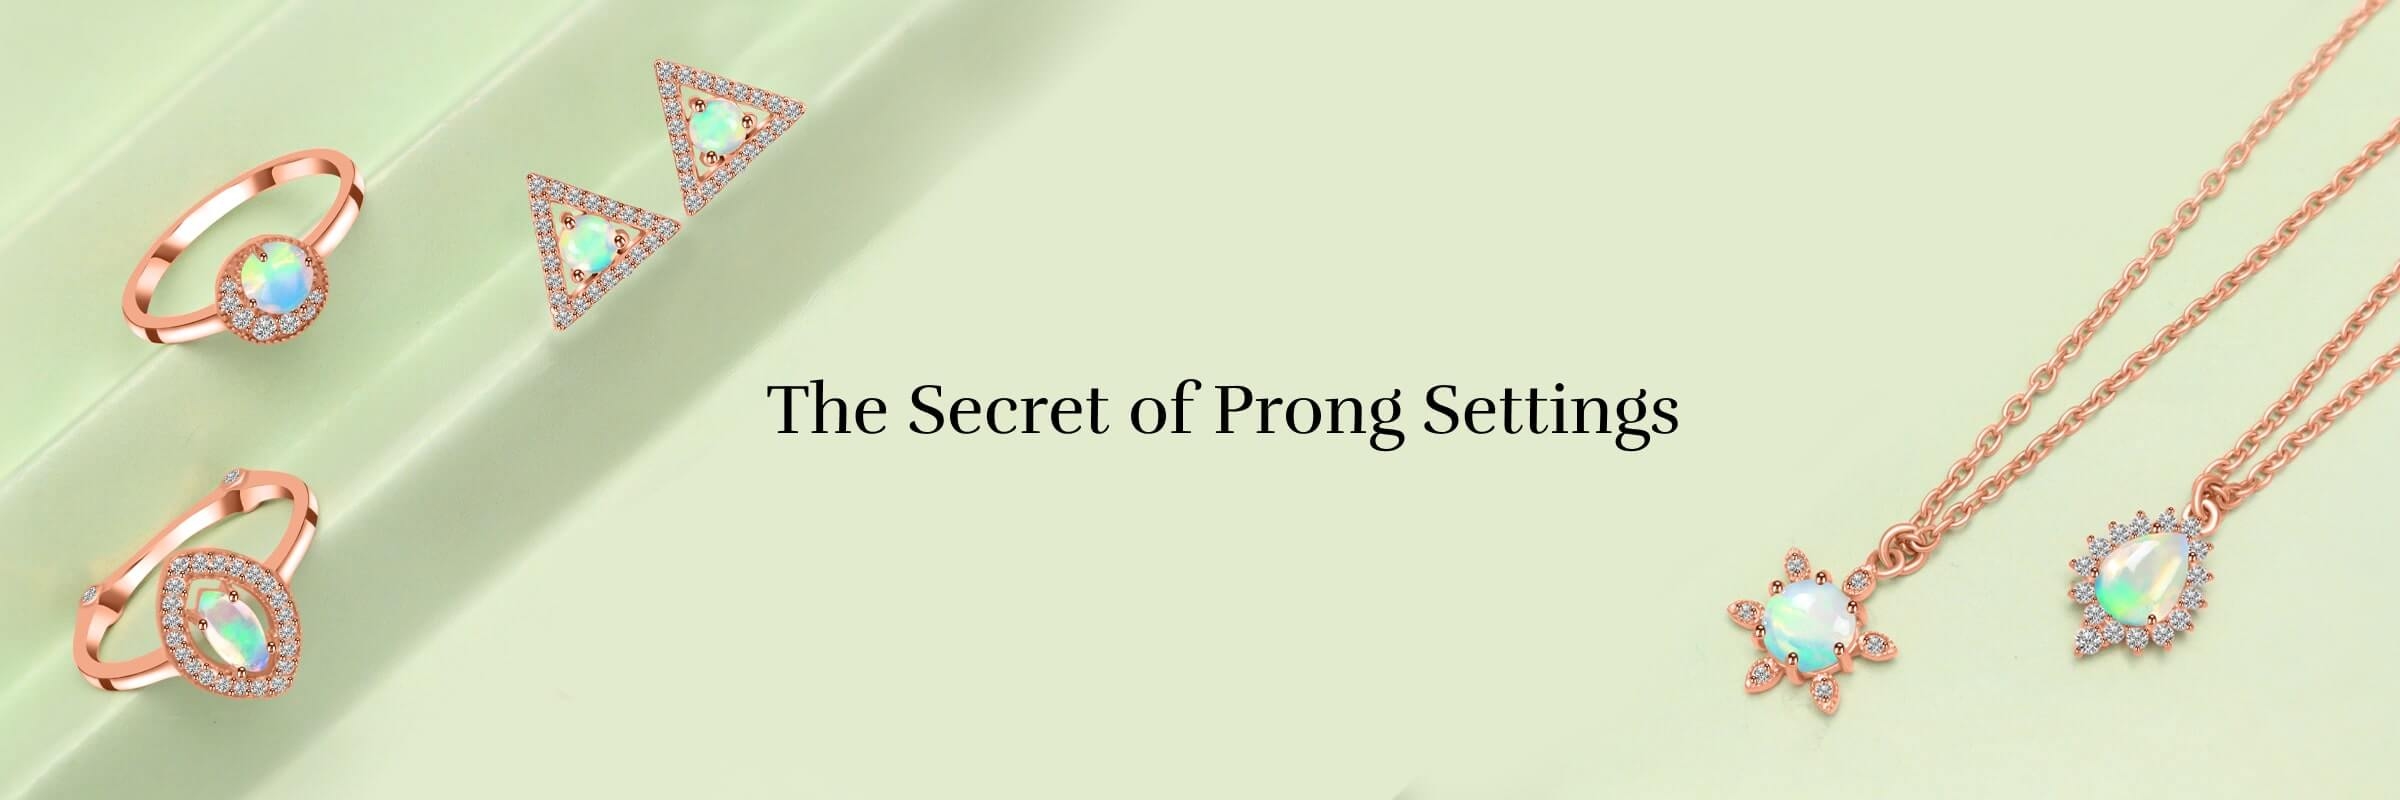 What Is A Prong Setting?